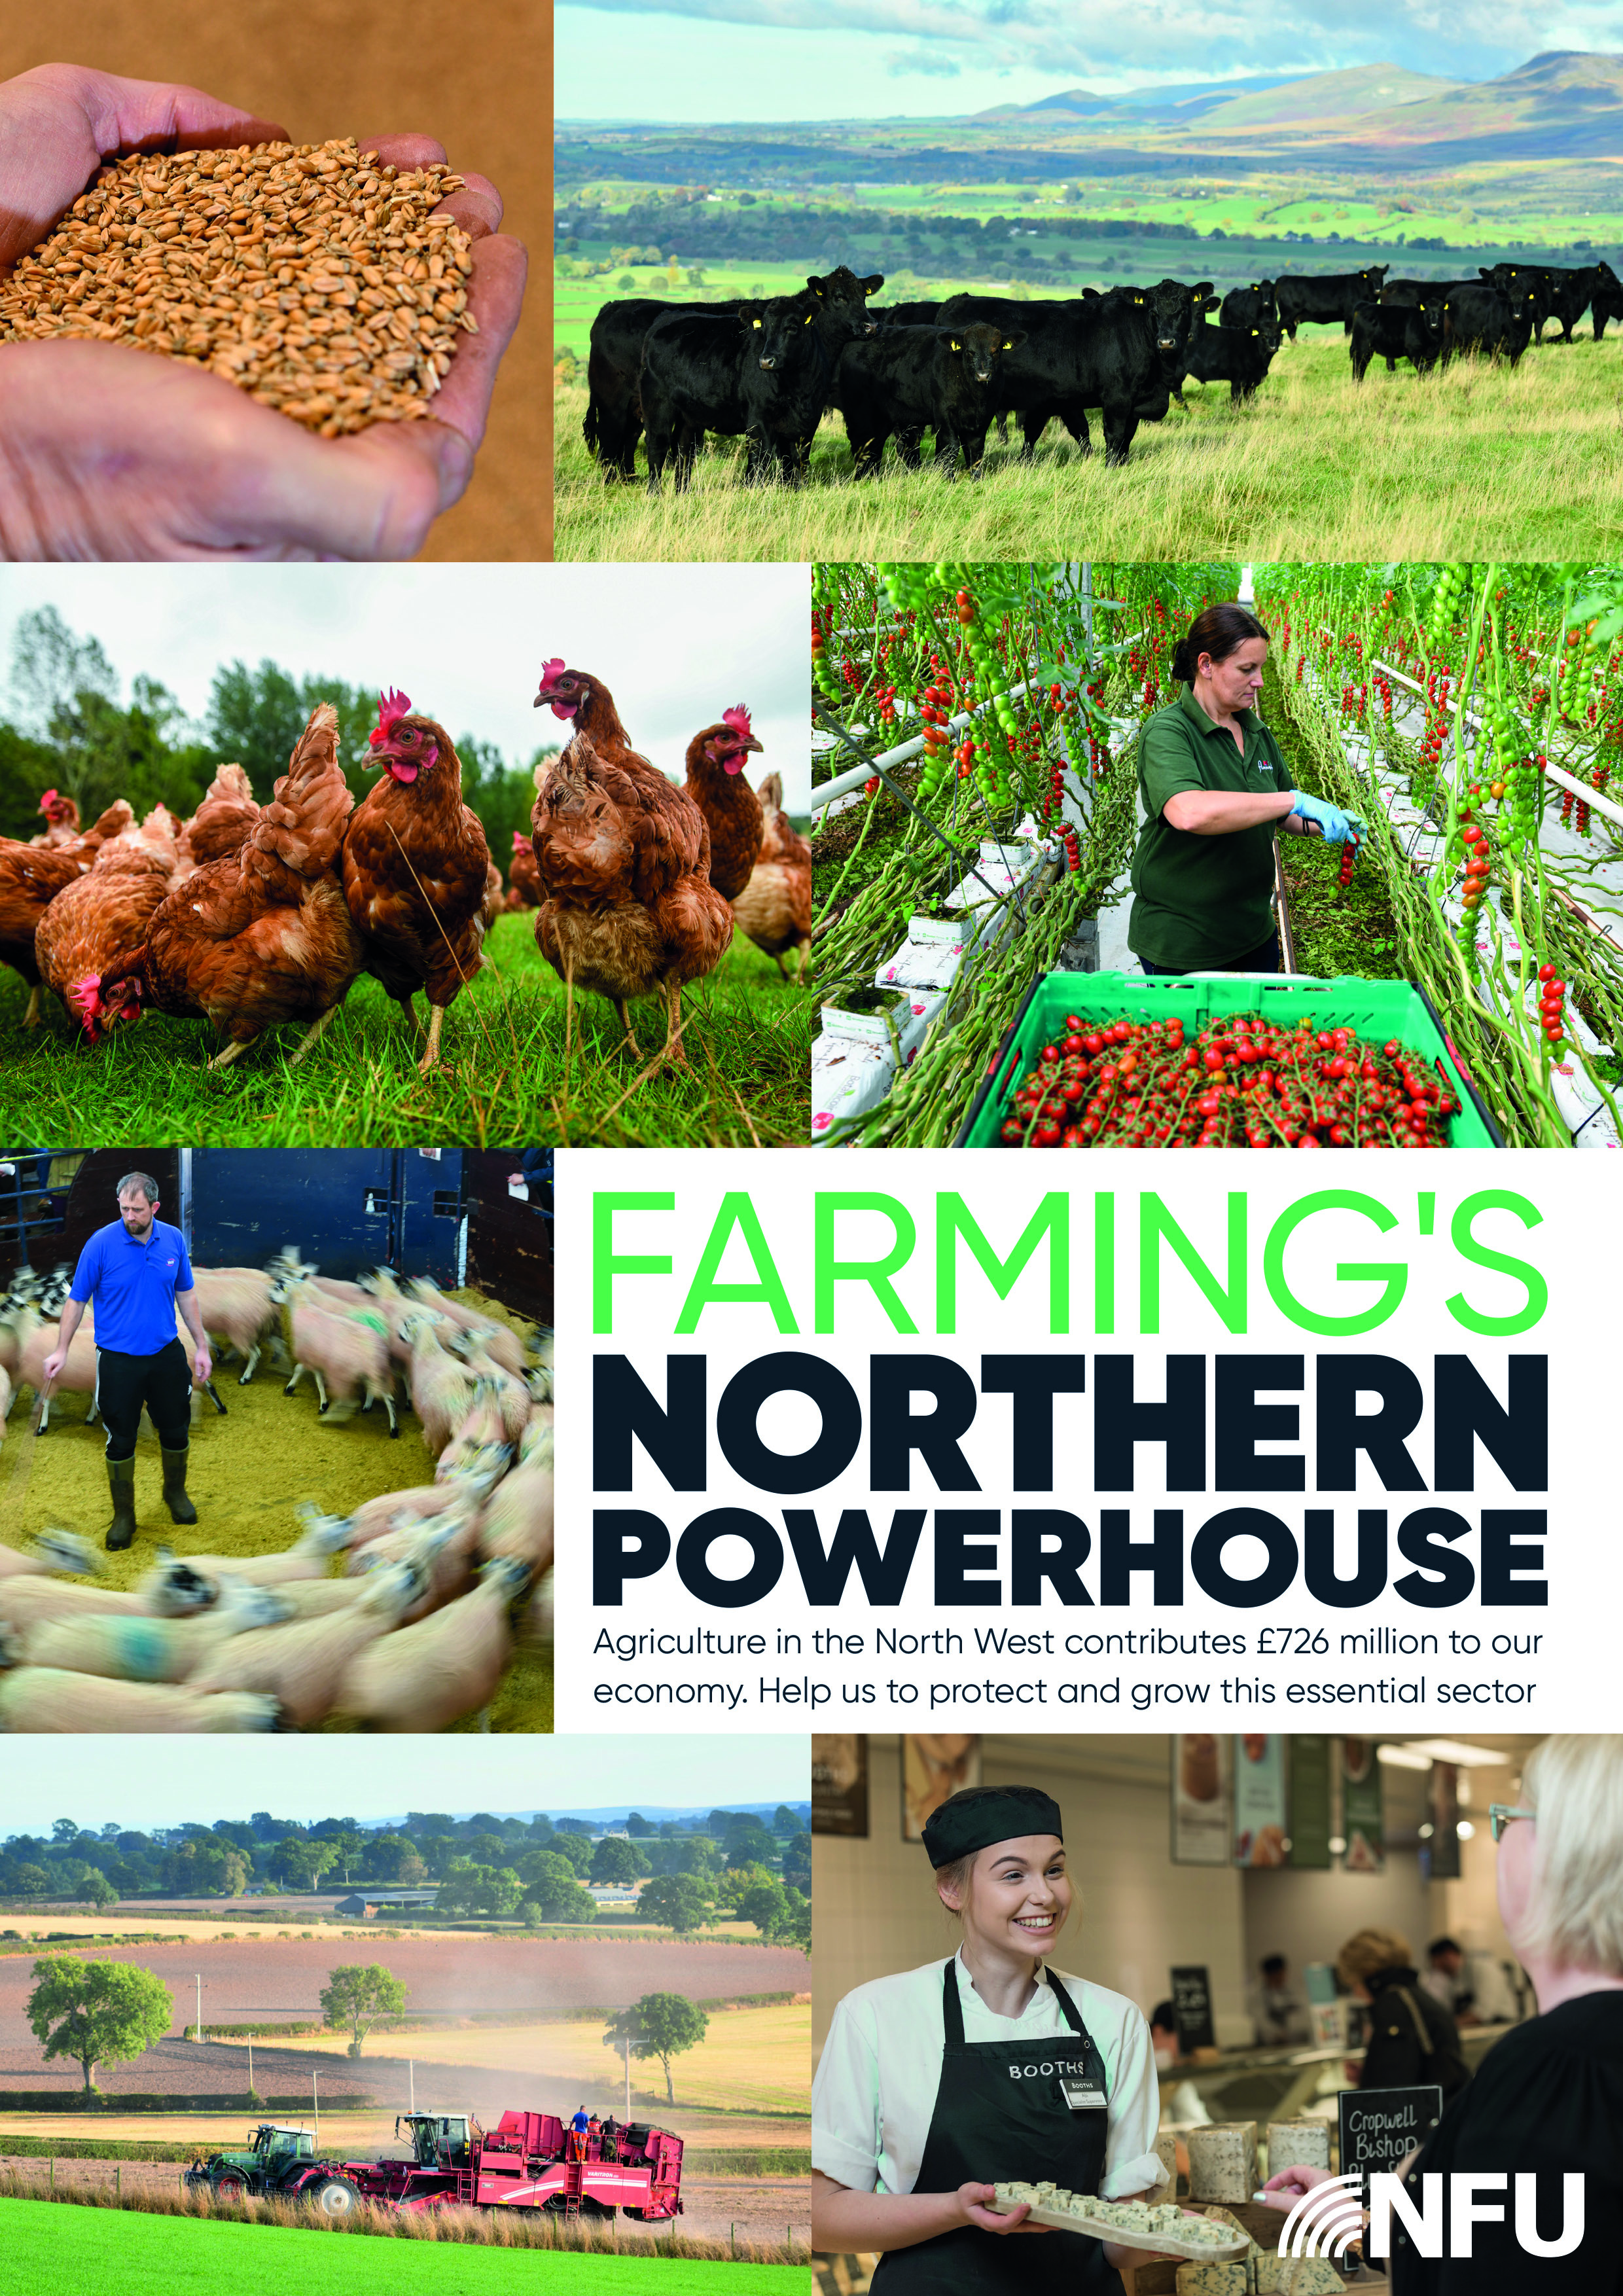 The brand new NFU North West campaign makes the case for why food, drink, and the farming industries are vital to the prosperity of our region. And we want you to get involved.